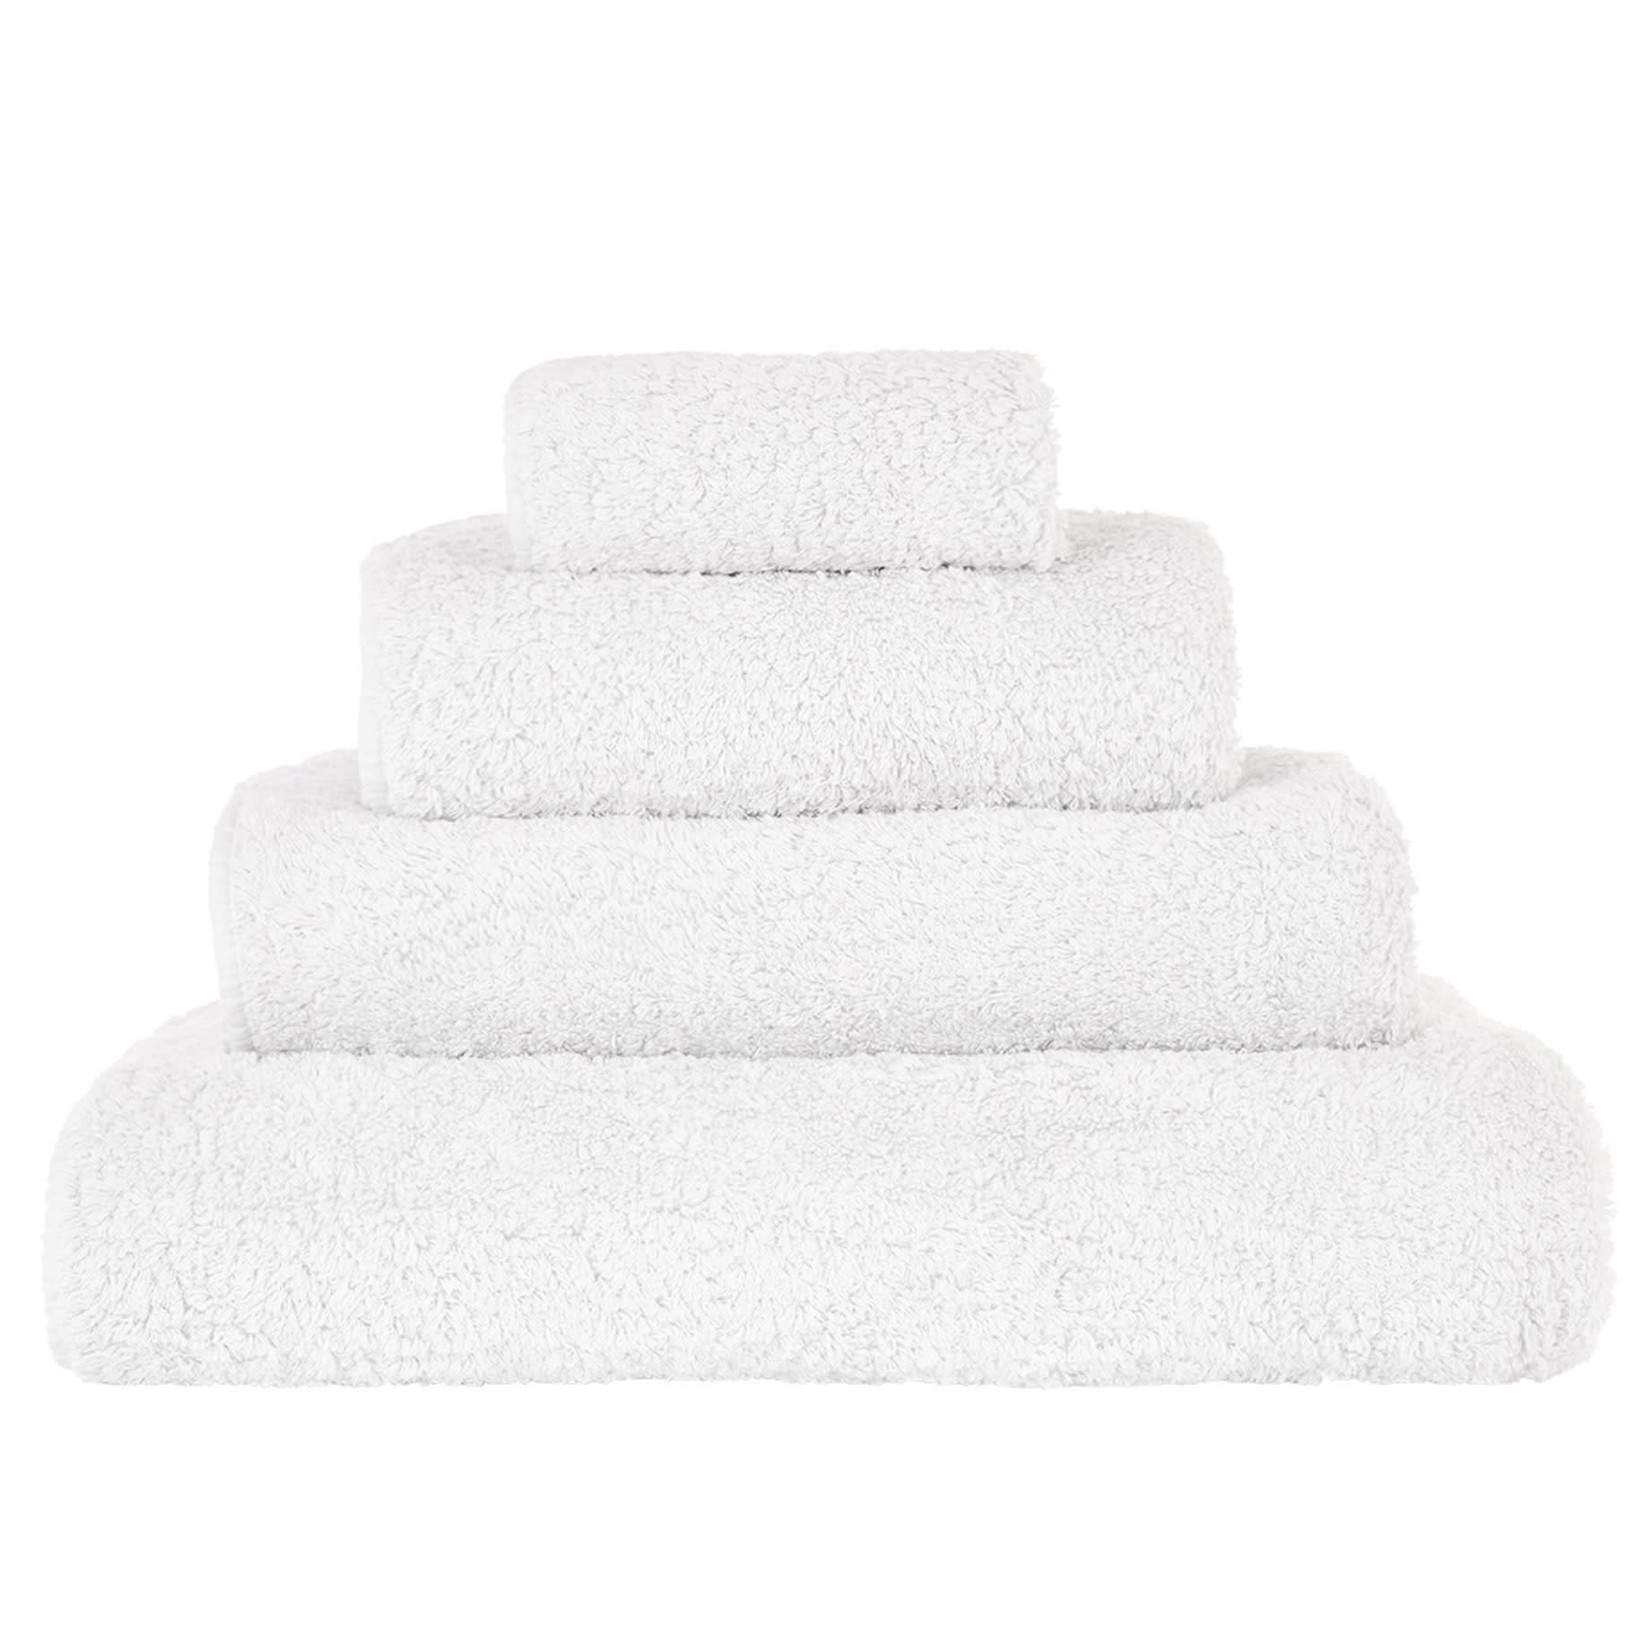 Abyss Abyss Super Pile Towels 100 White